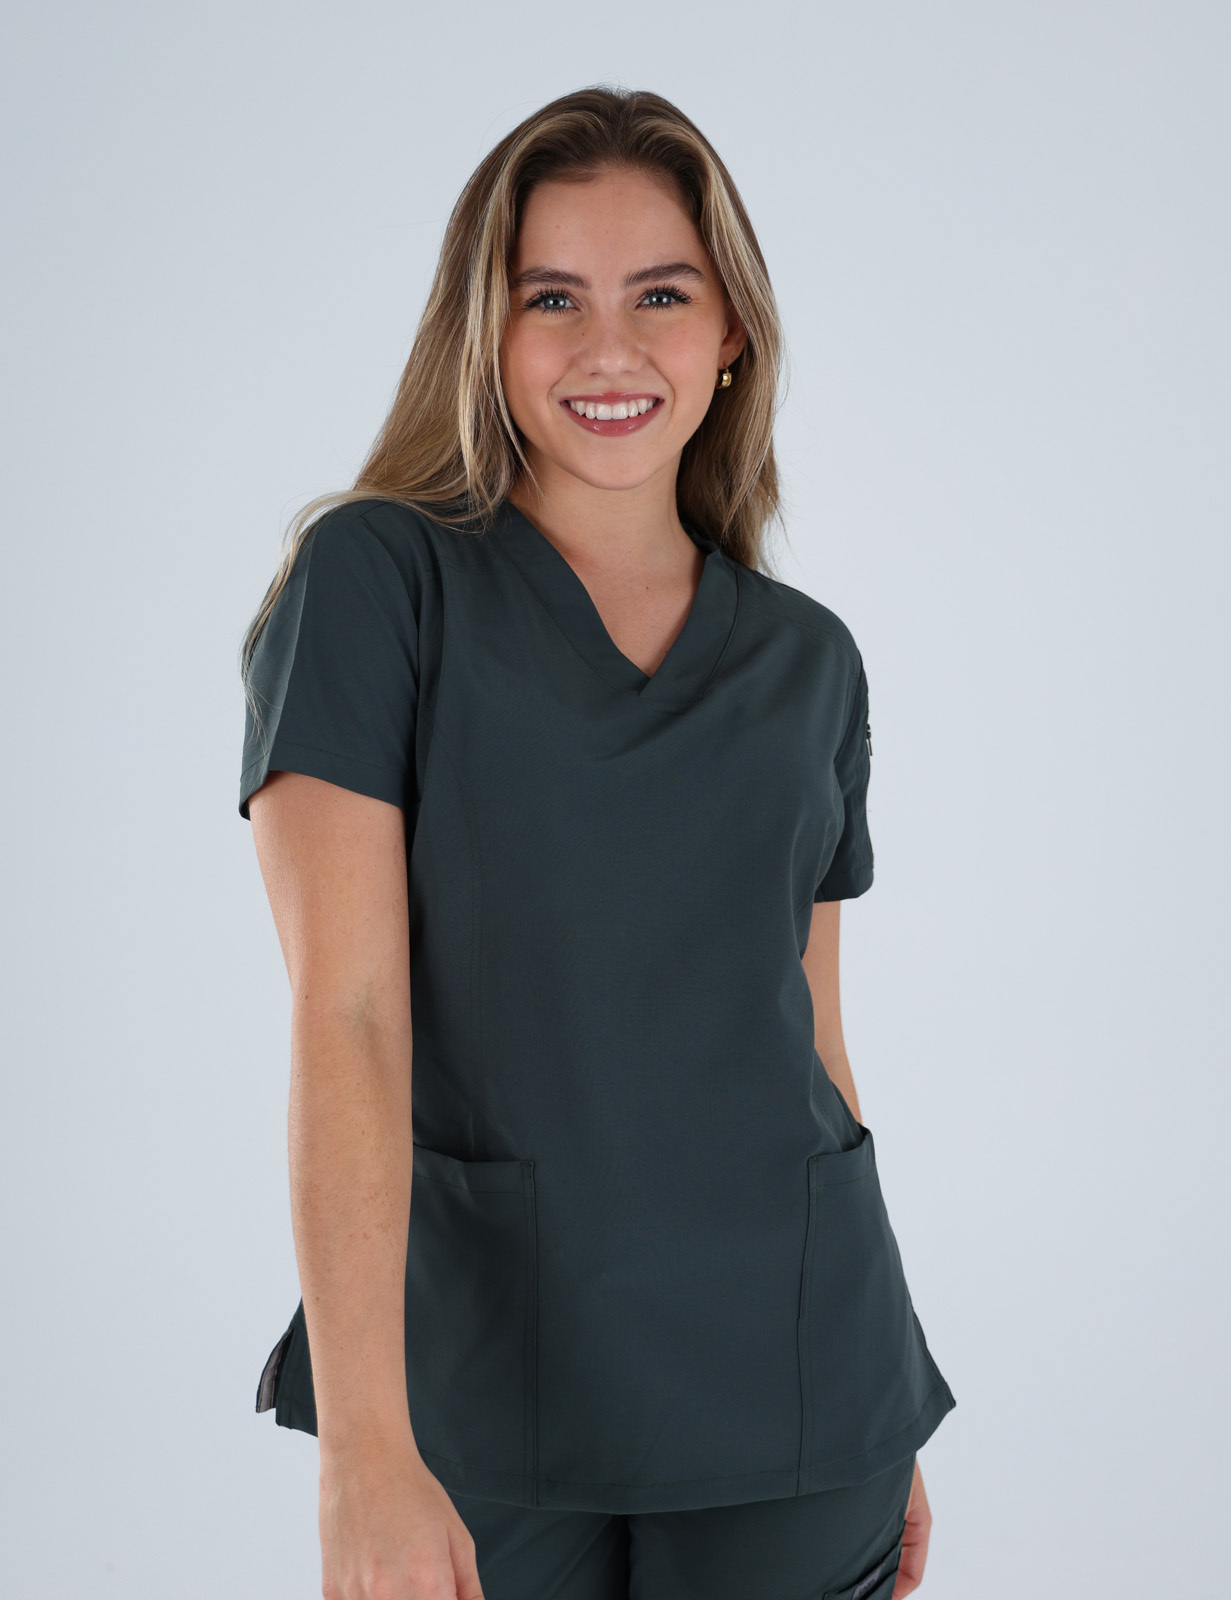 Women's Pure Cotton Elastic Waist Scrubs Tops + Scrub Pants Deep V Neck  with Two Buttons Fashion Doctor Nursing Medical Uniforms